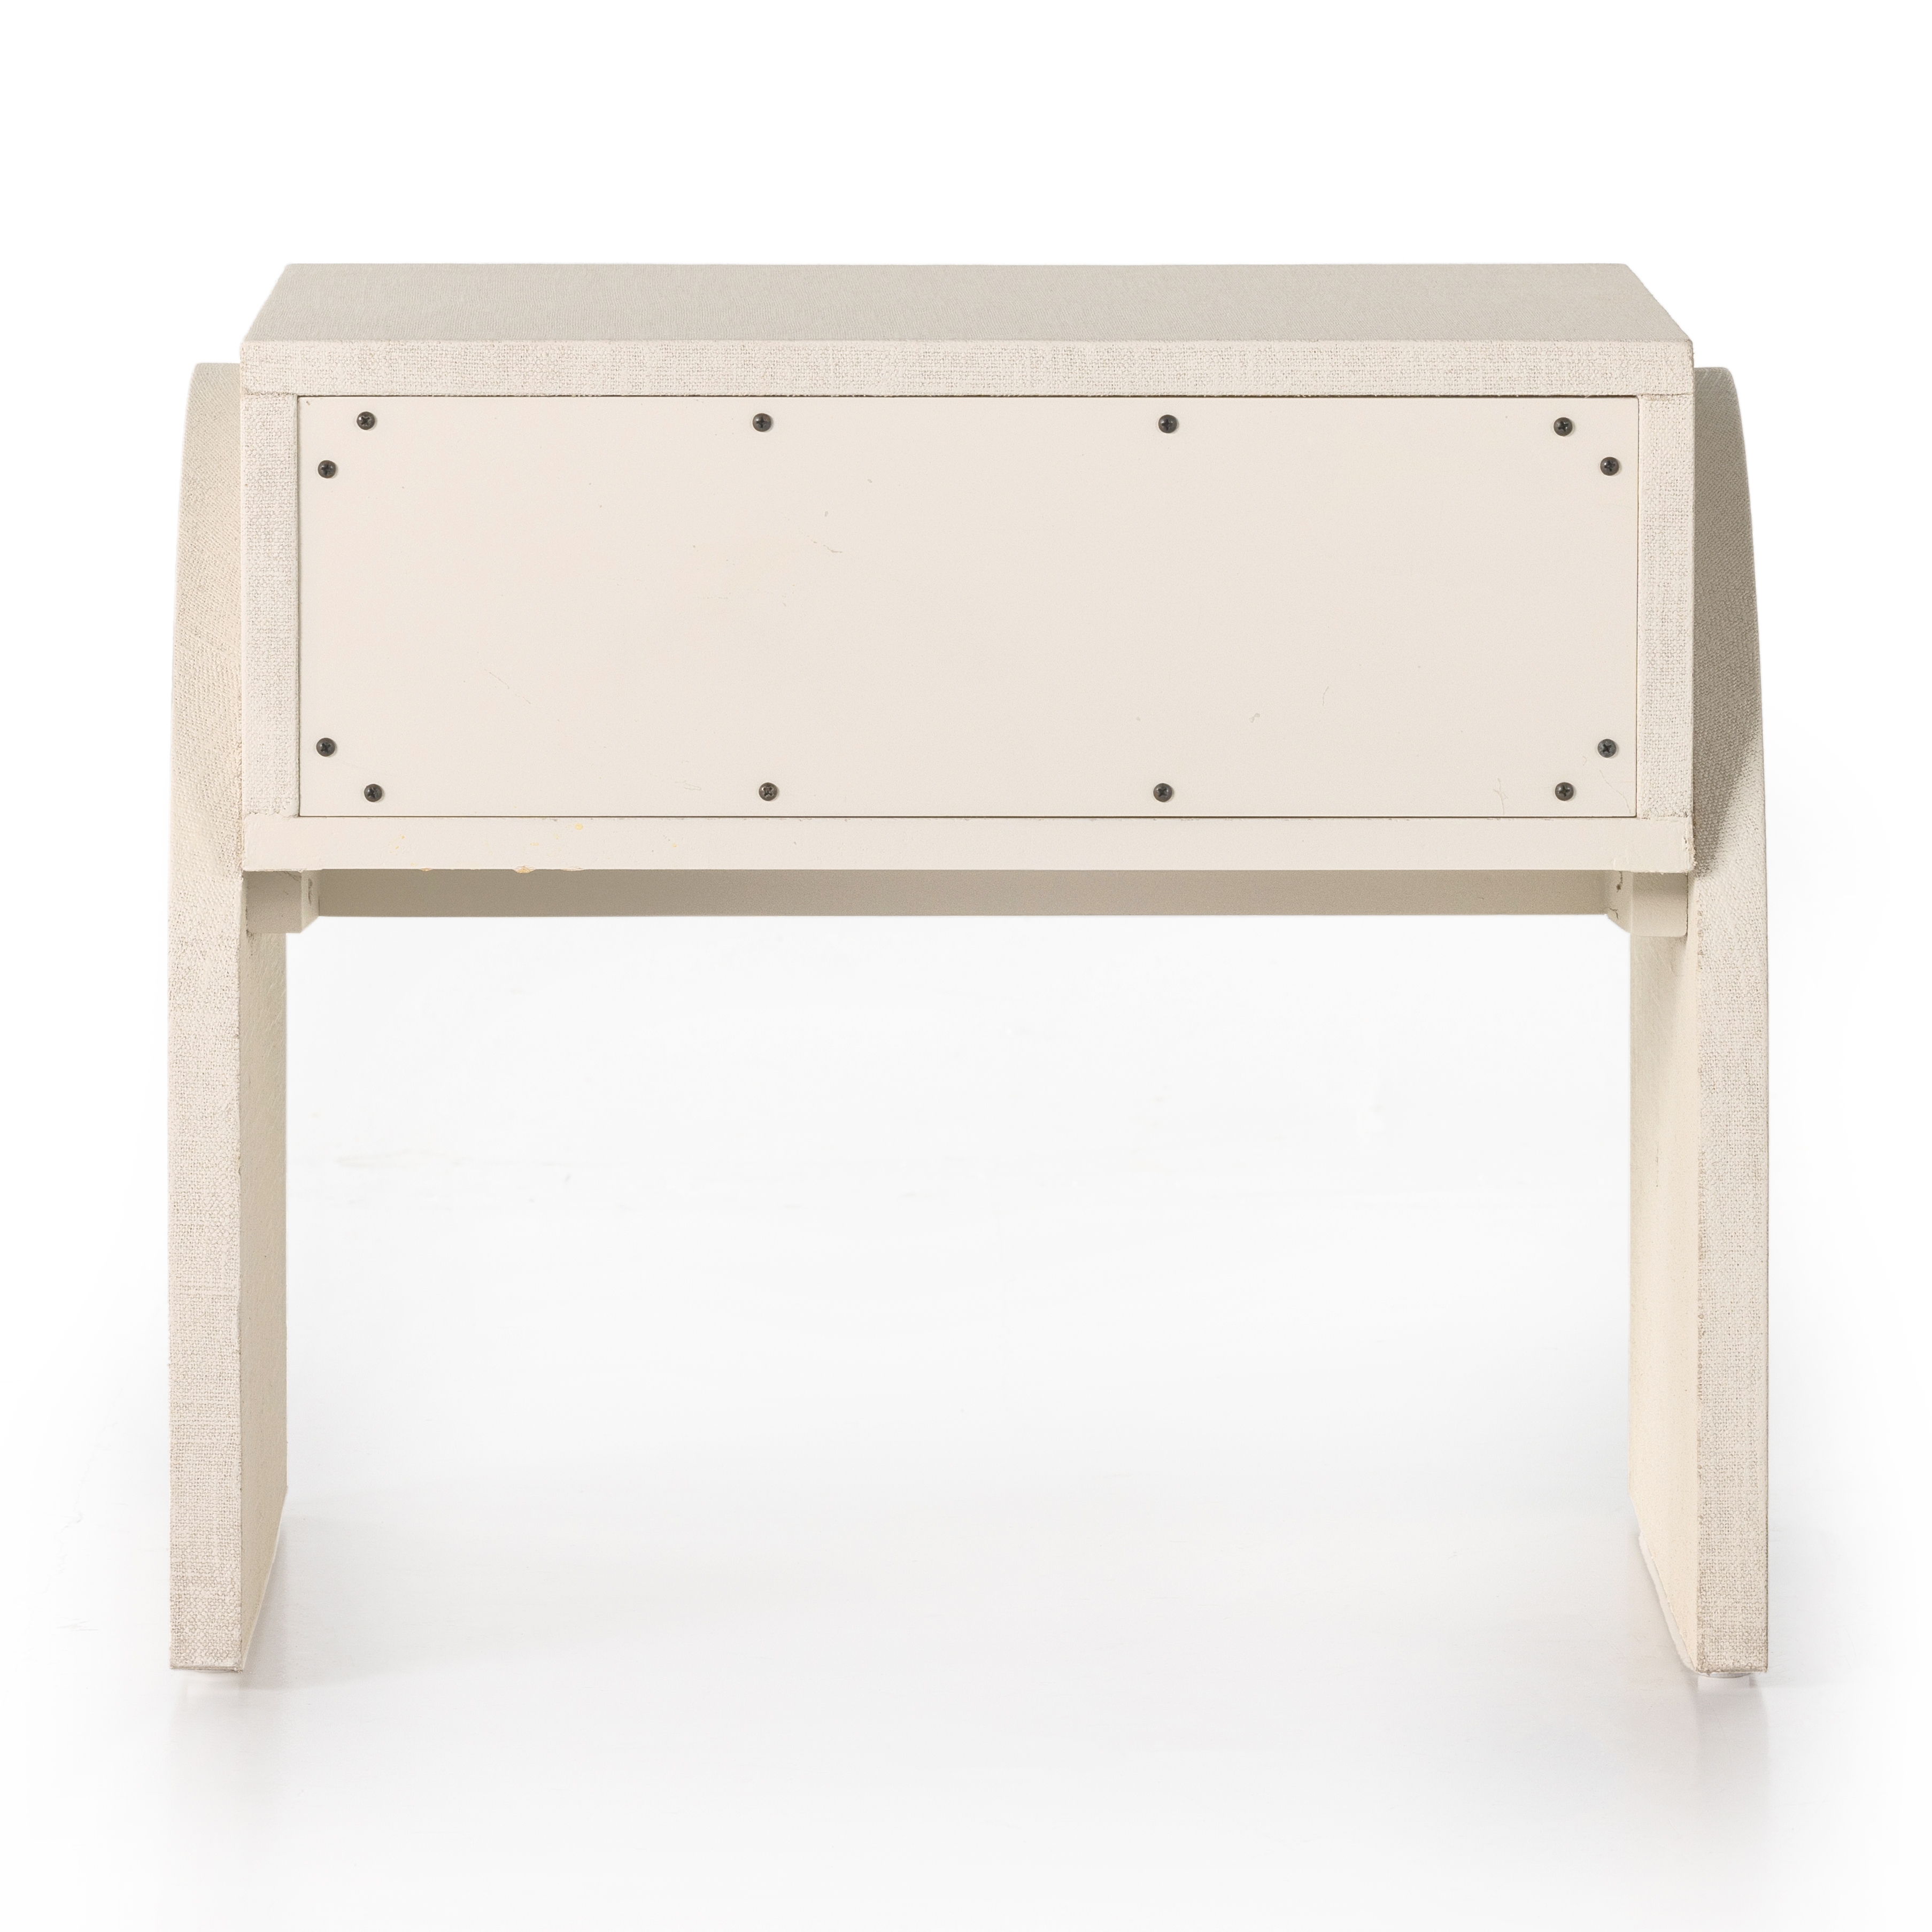 Cressida End Table-Ivory Painted Linen - Image 6